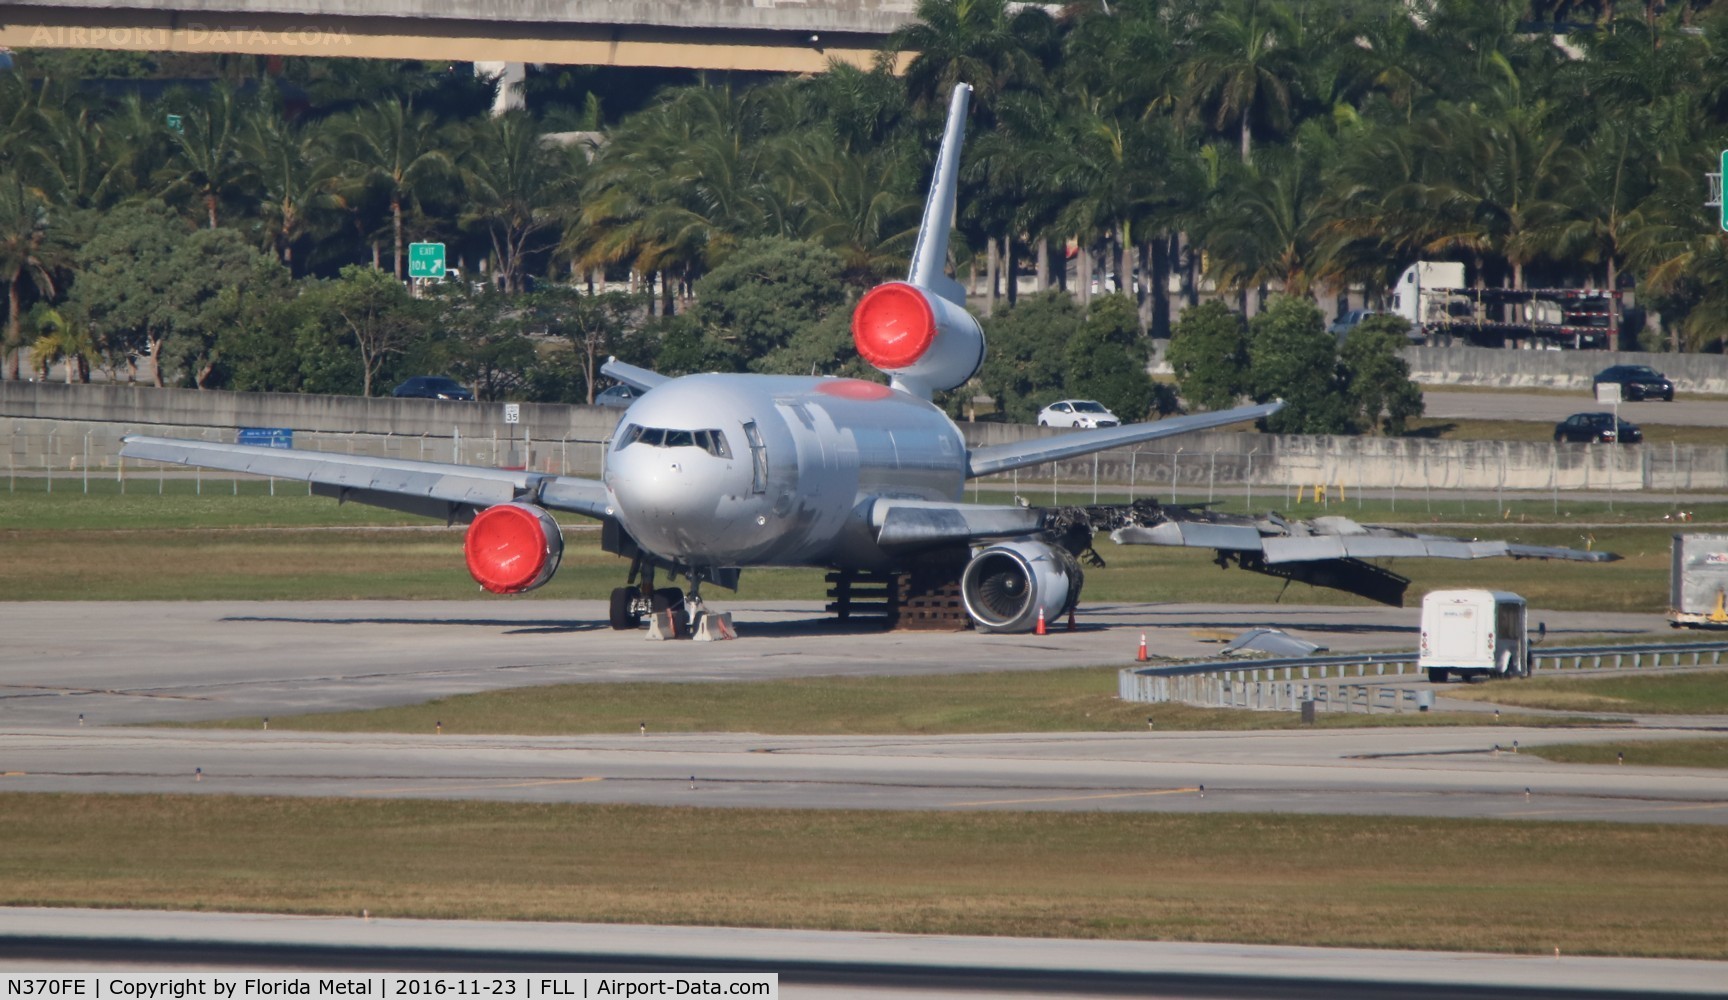 N370FE, 1972 McDonnell Douglas MD-10-10F C/N 46608, Fed Ex MD-10 that had a landing incident at FLL